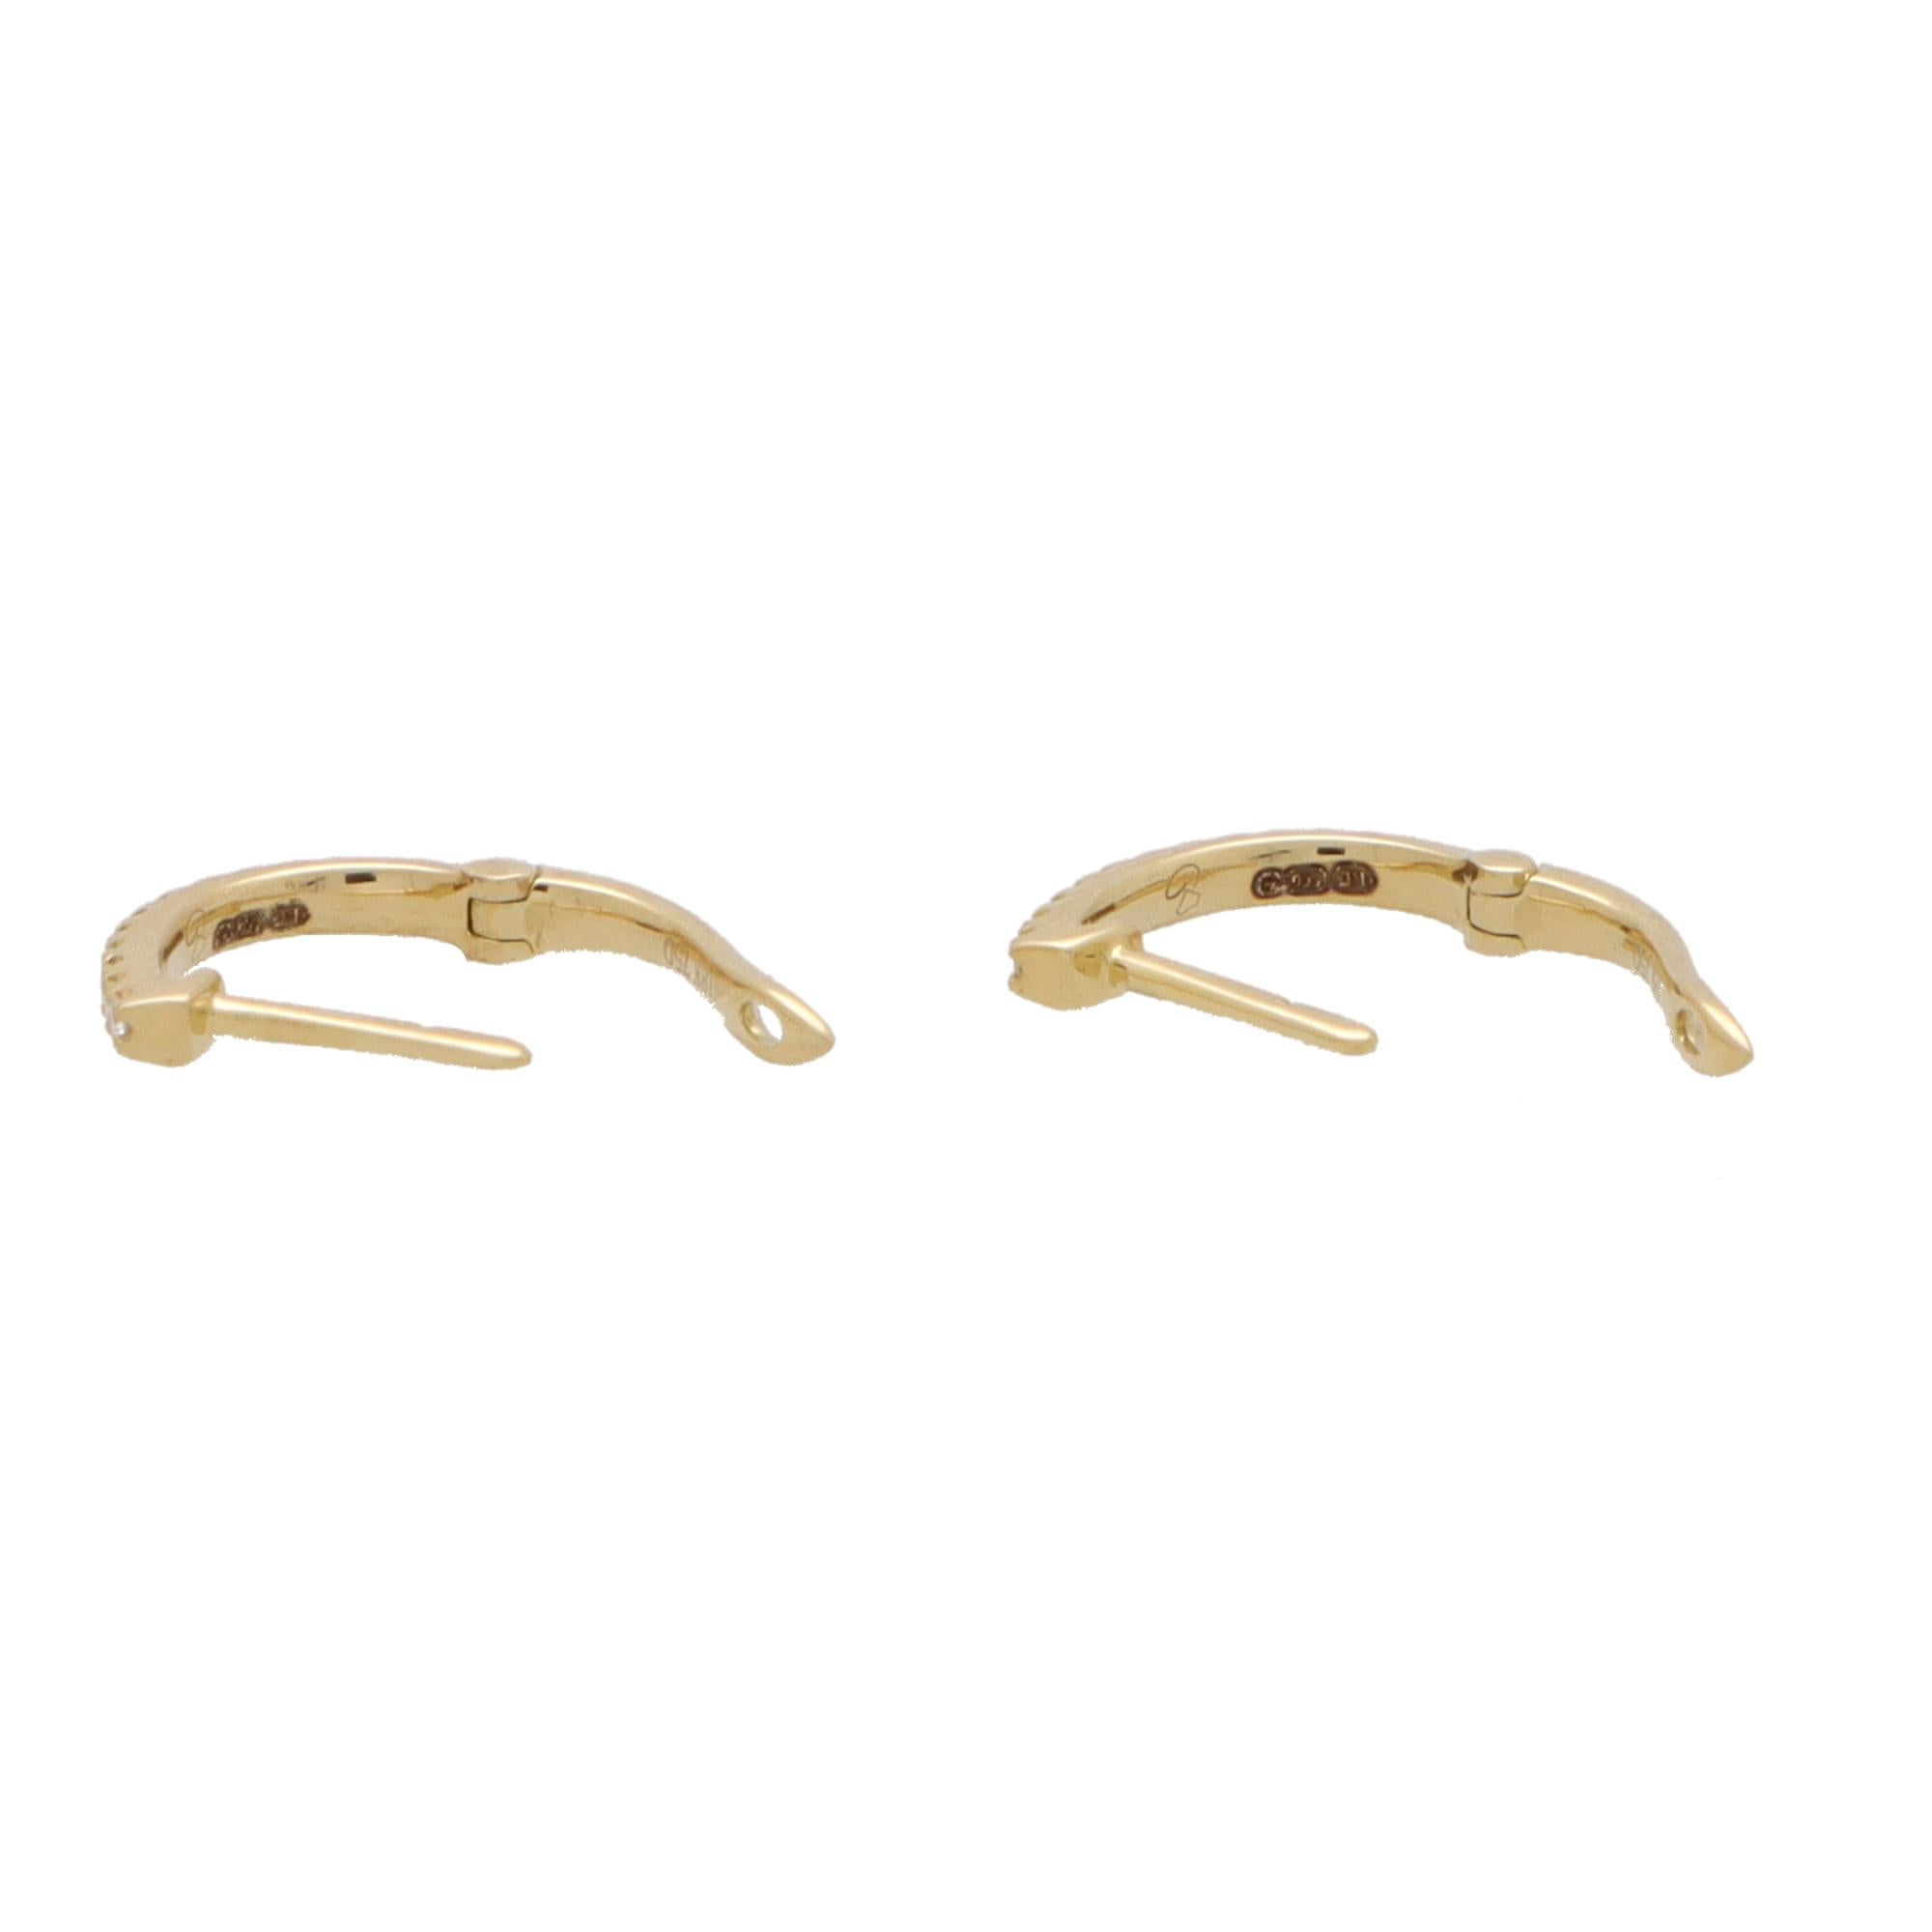  A perfect everyday pair of diamond hoop earrings set in 18k yellow gold.

The earrings are pave set to the front with round brilliant cut diamonds and secured with a post and hinge shut fitting.

Due to the design and size these earrings would make